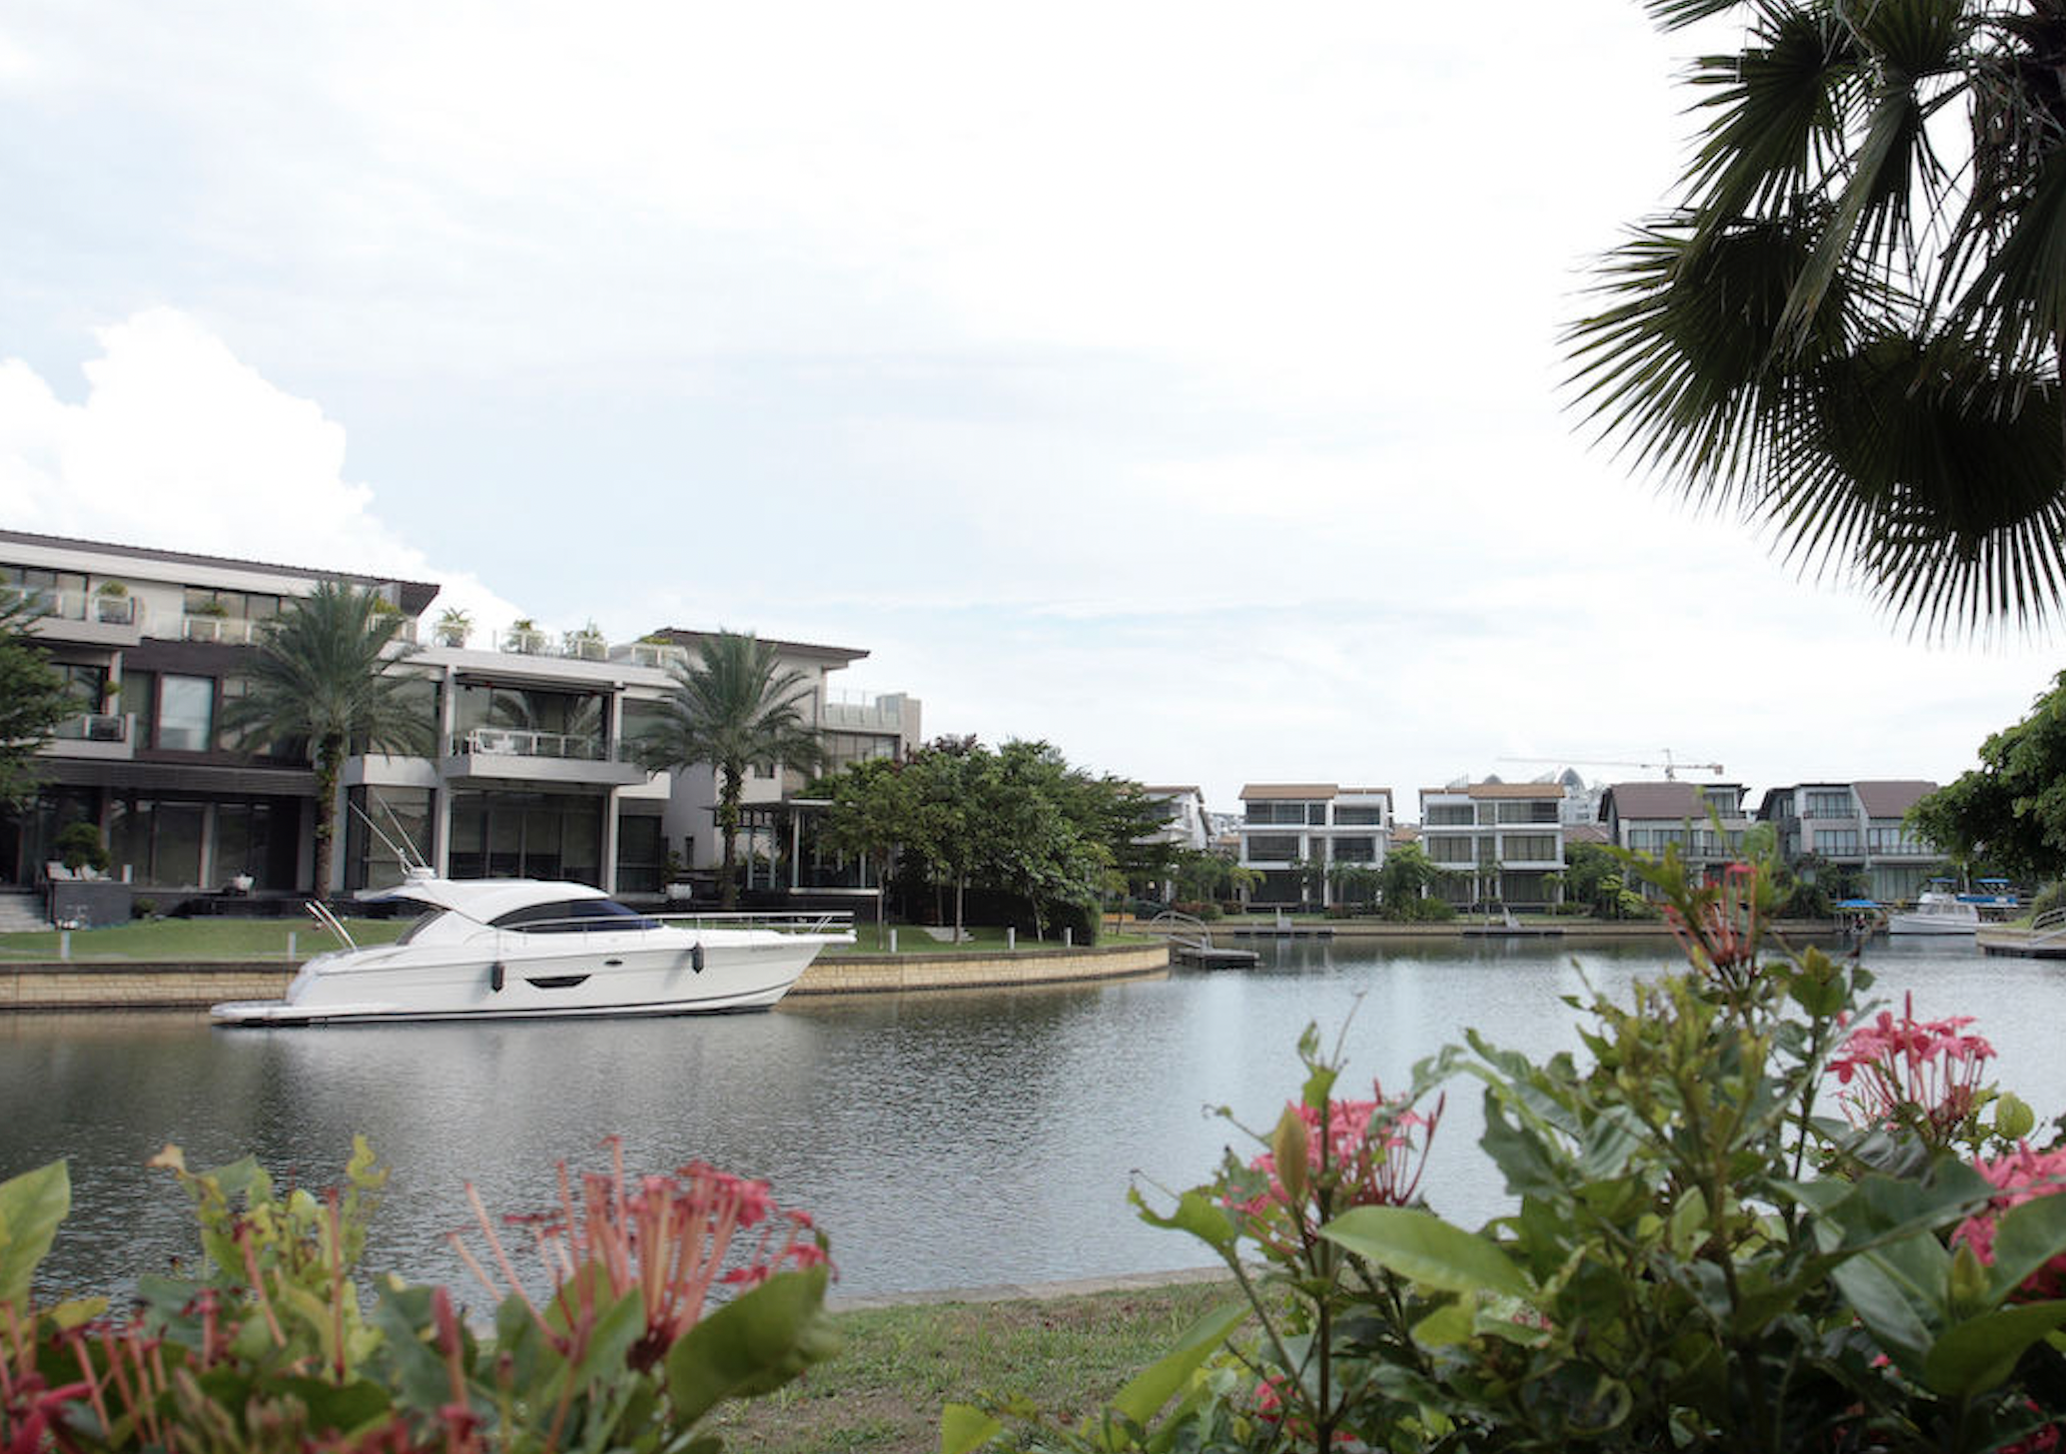 Bungalows with private berths along the waterway are typical of the sorts of property available in Sentosa Cove, Singapore, often at lower prices than comparable property on the mainland. Photo: EdgeProp Singapore